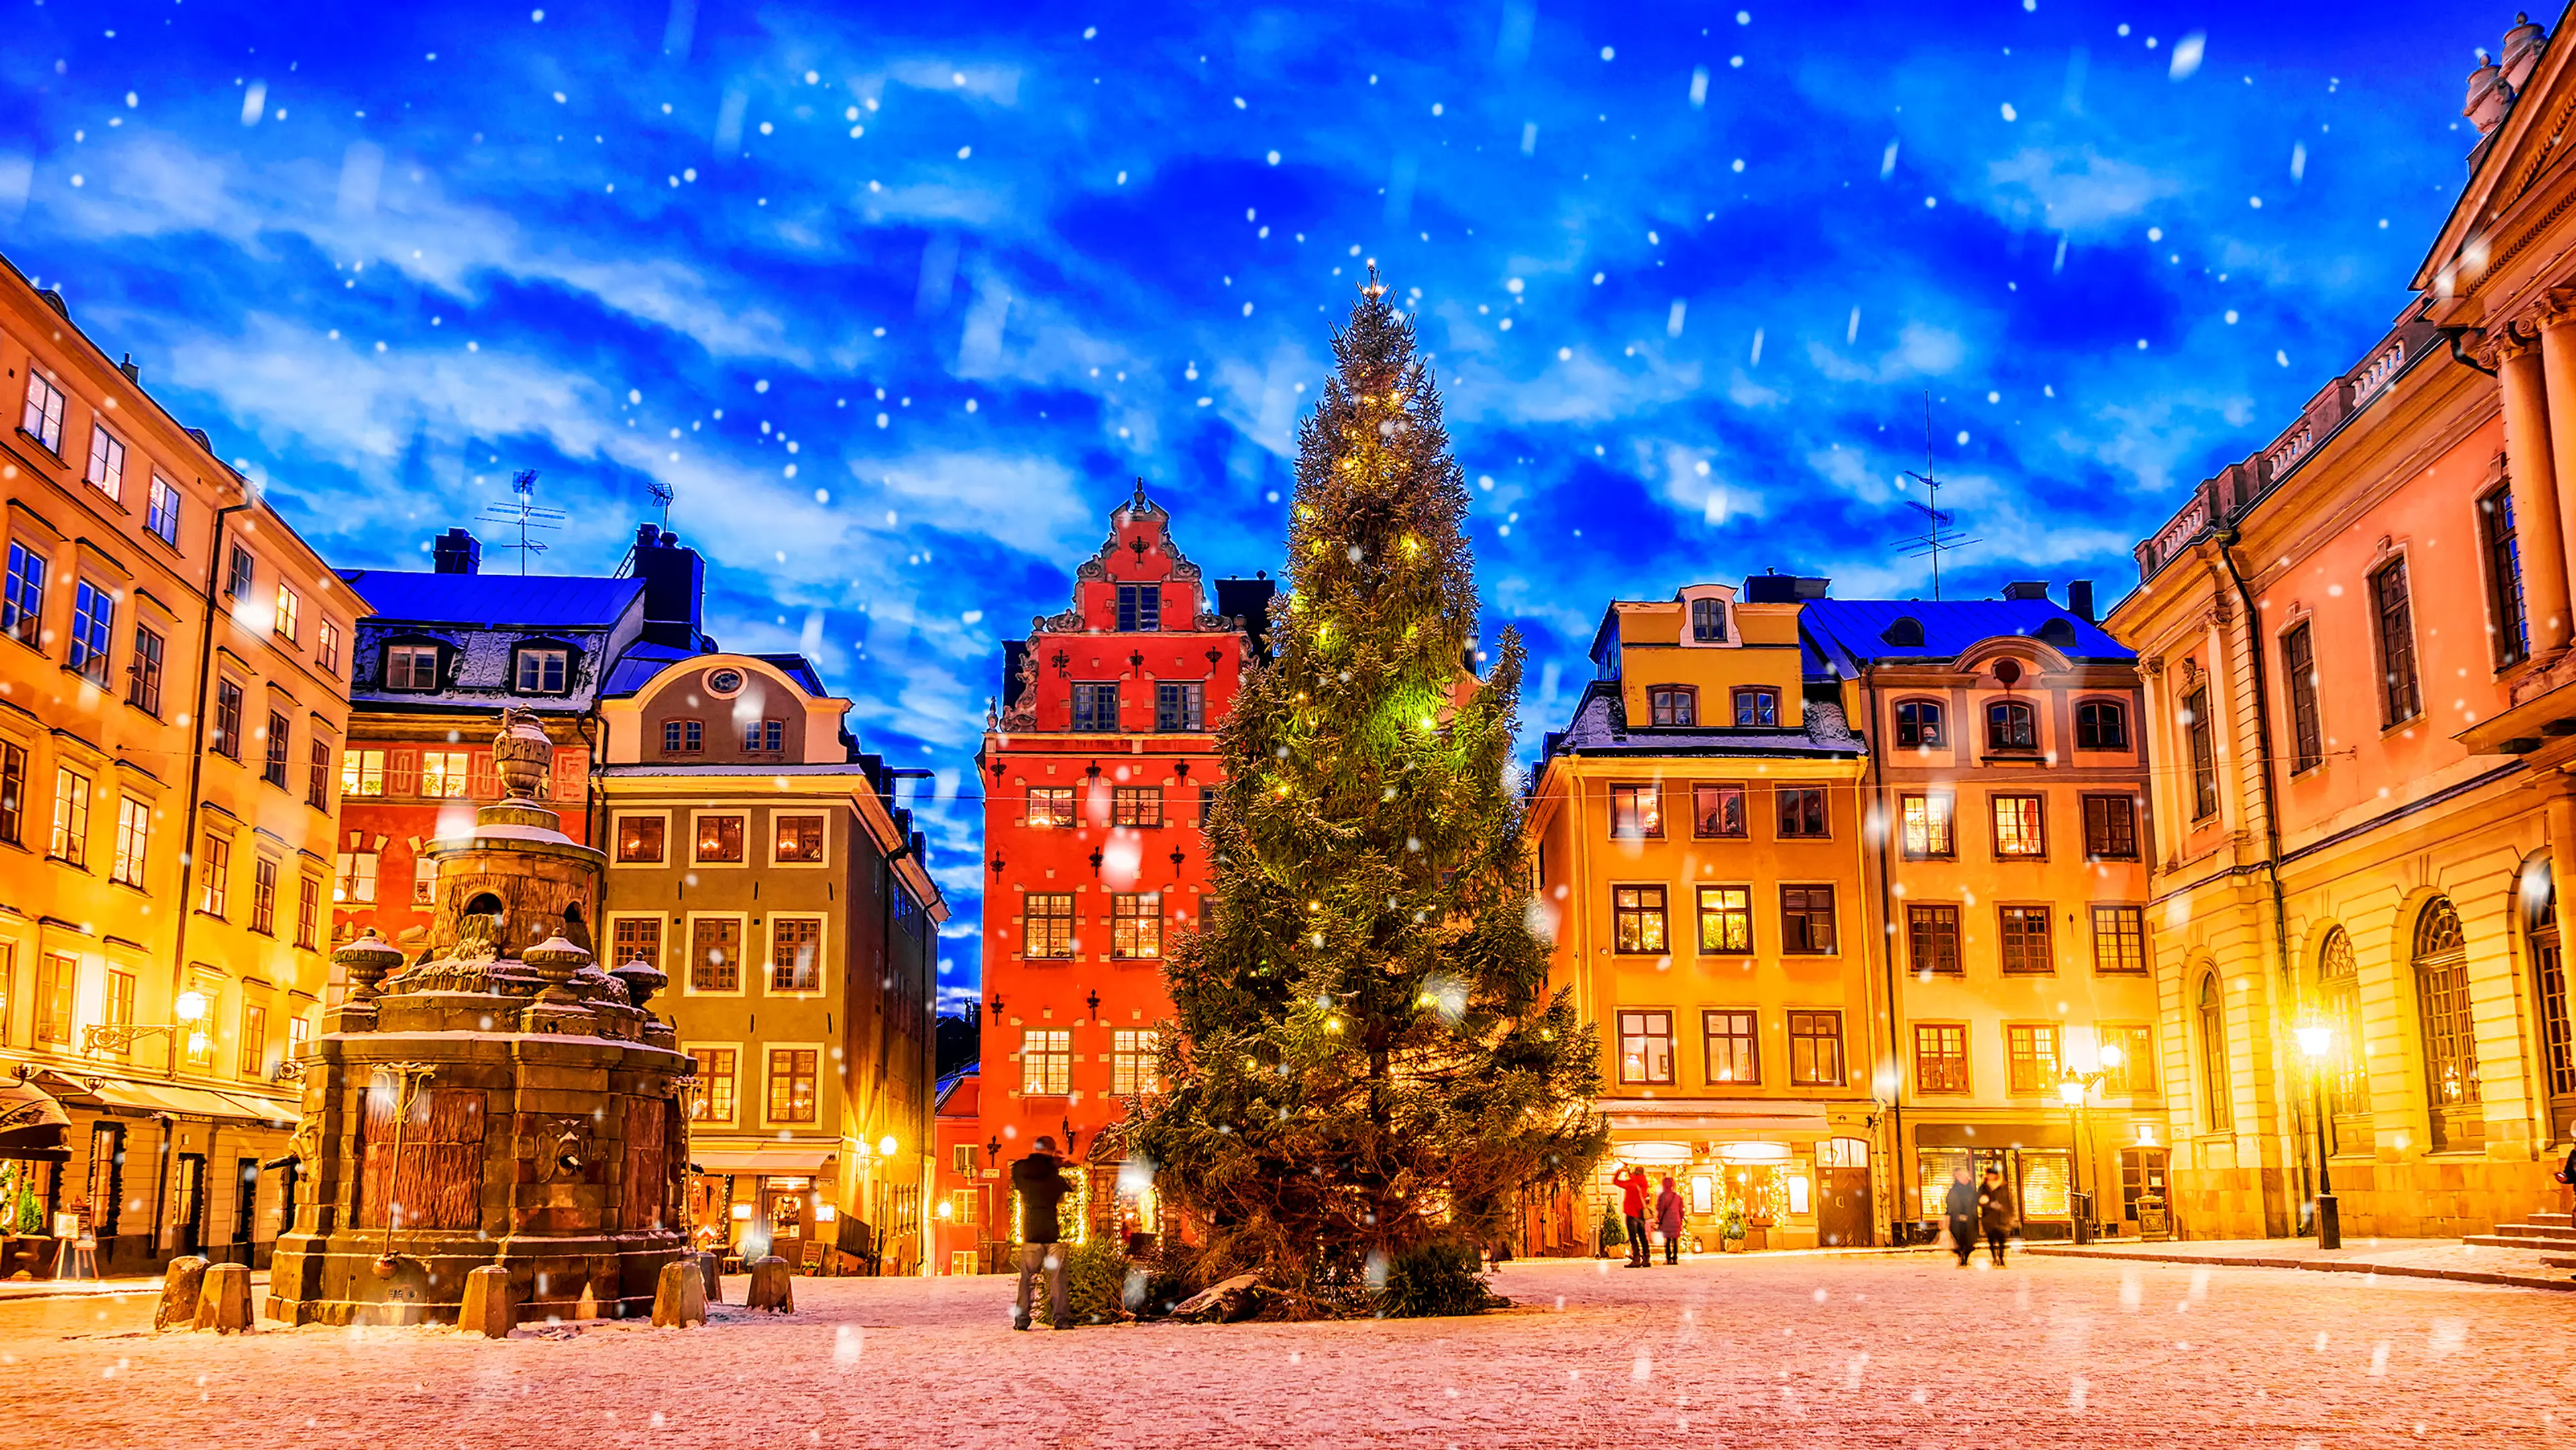 Stortorget square decorated to Christmas time at night